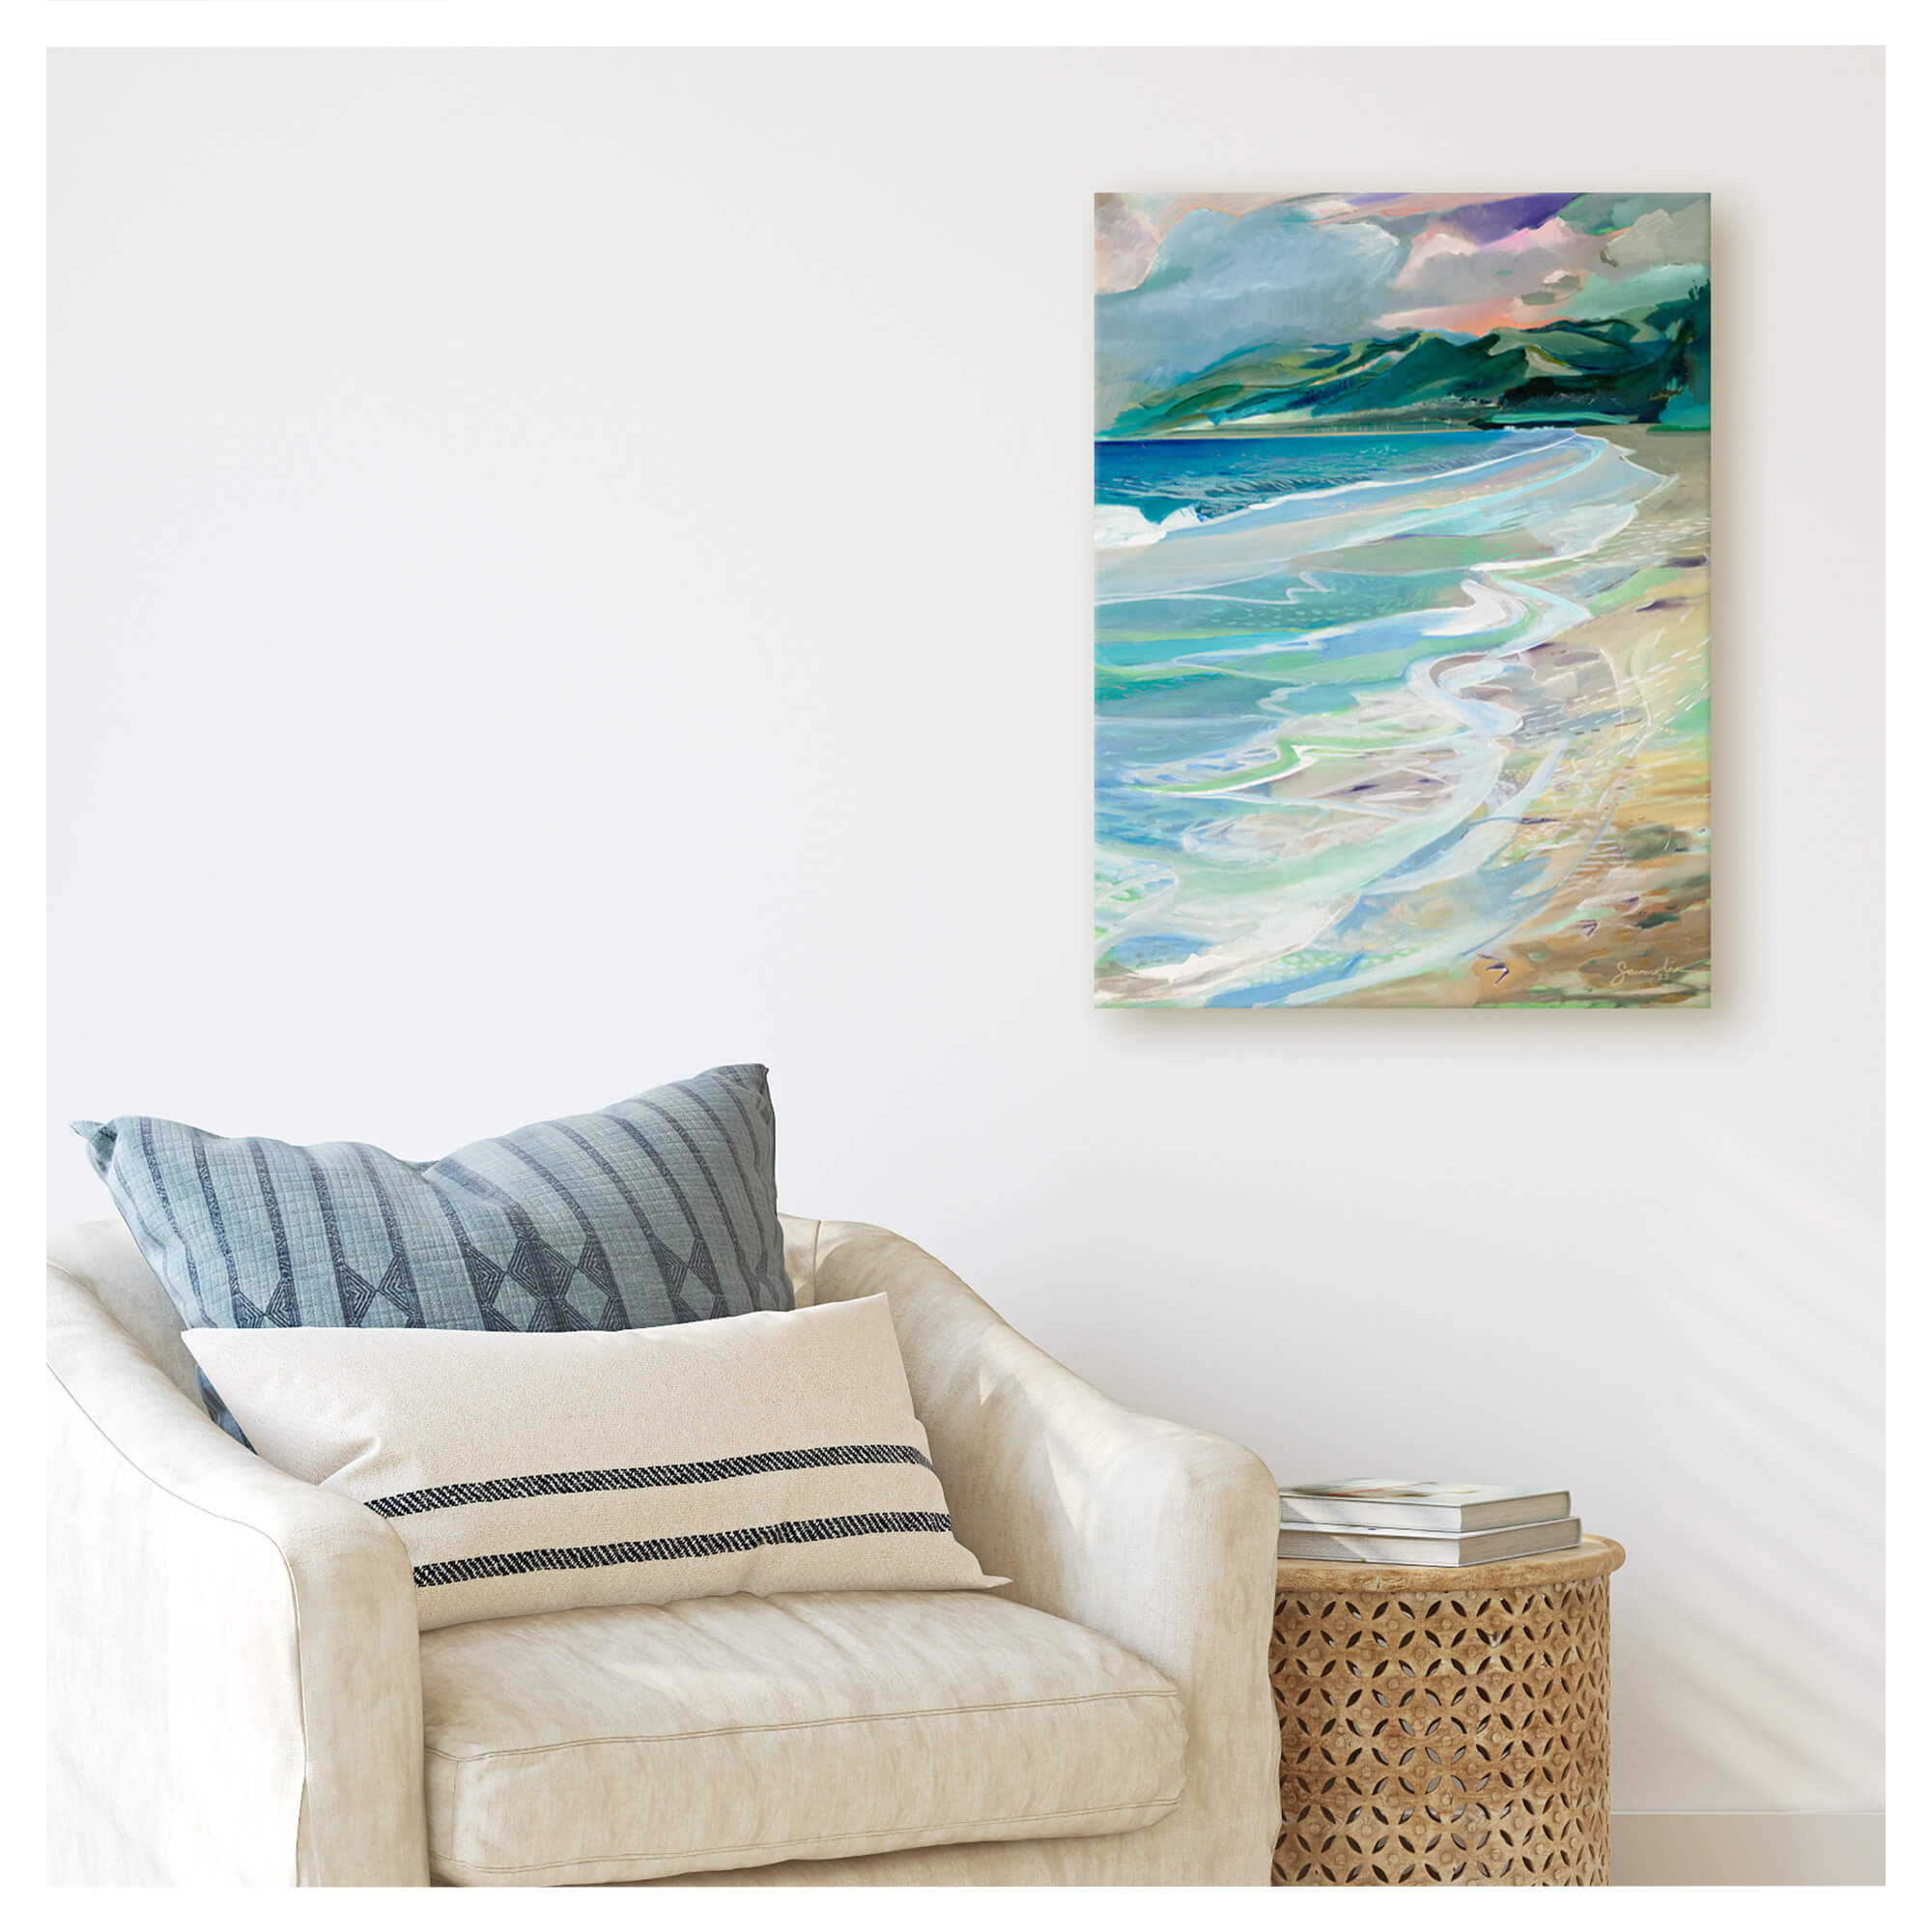 A canvas giclée art print featuring a beautiful abstract landscape with crashing waves and distant mountains by popular Hawaii artist Saumolia Puapuaga